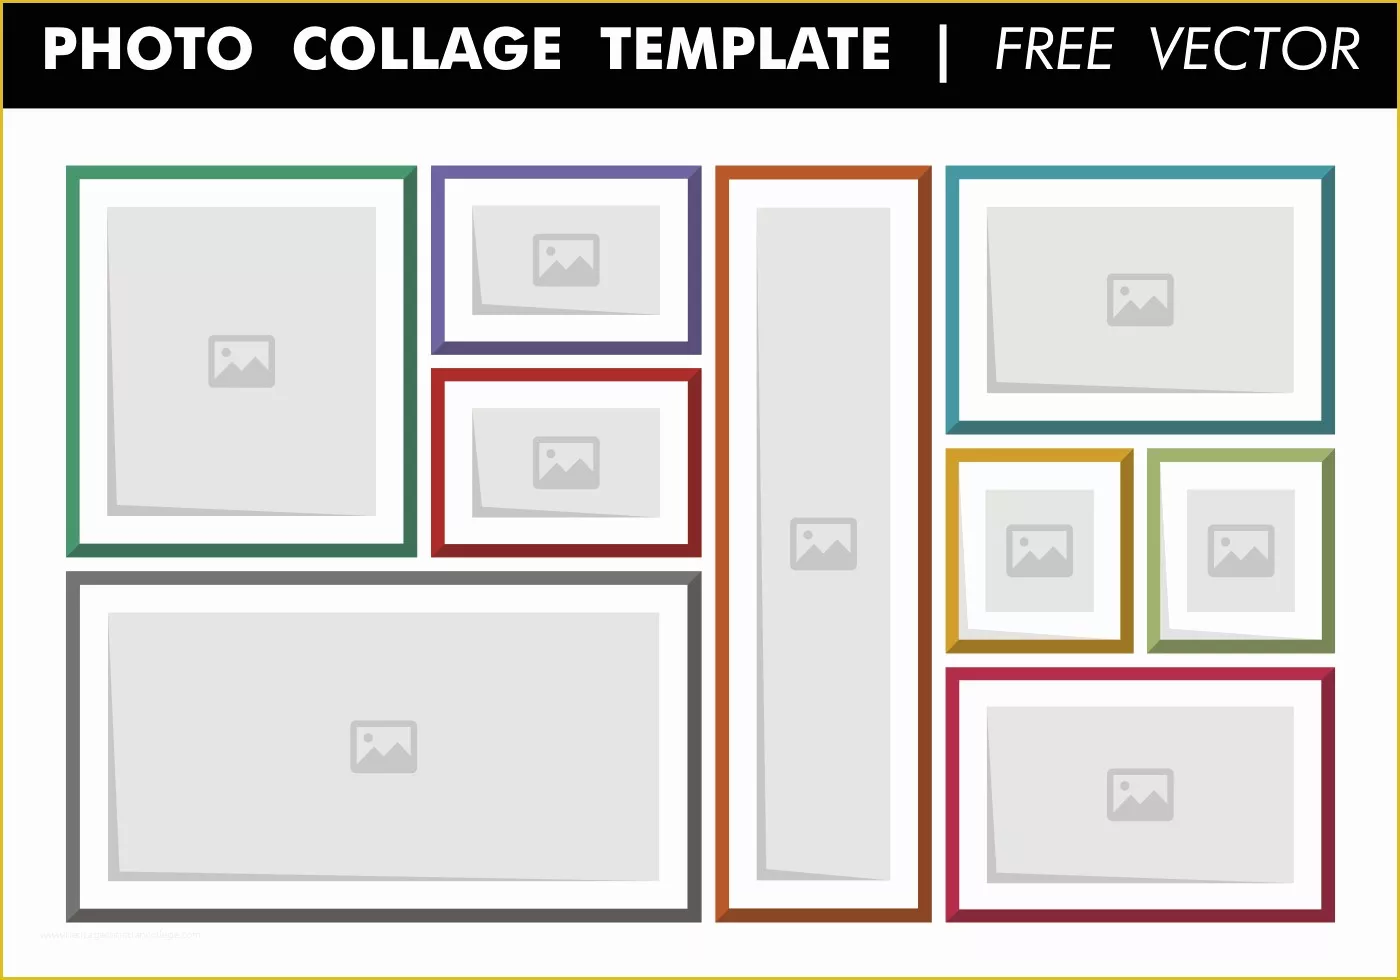 Free Photoshop Collage Templates Of Collage Template Free Vector Download Free Vector